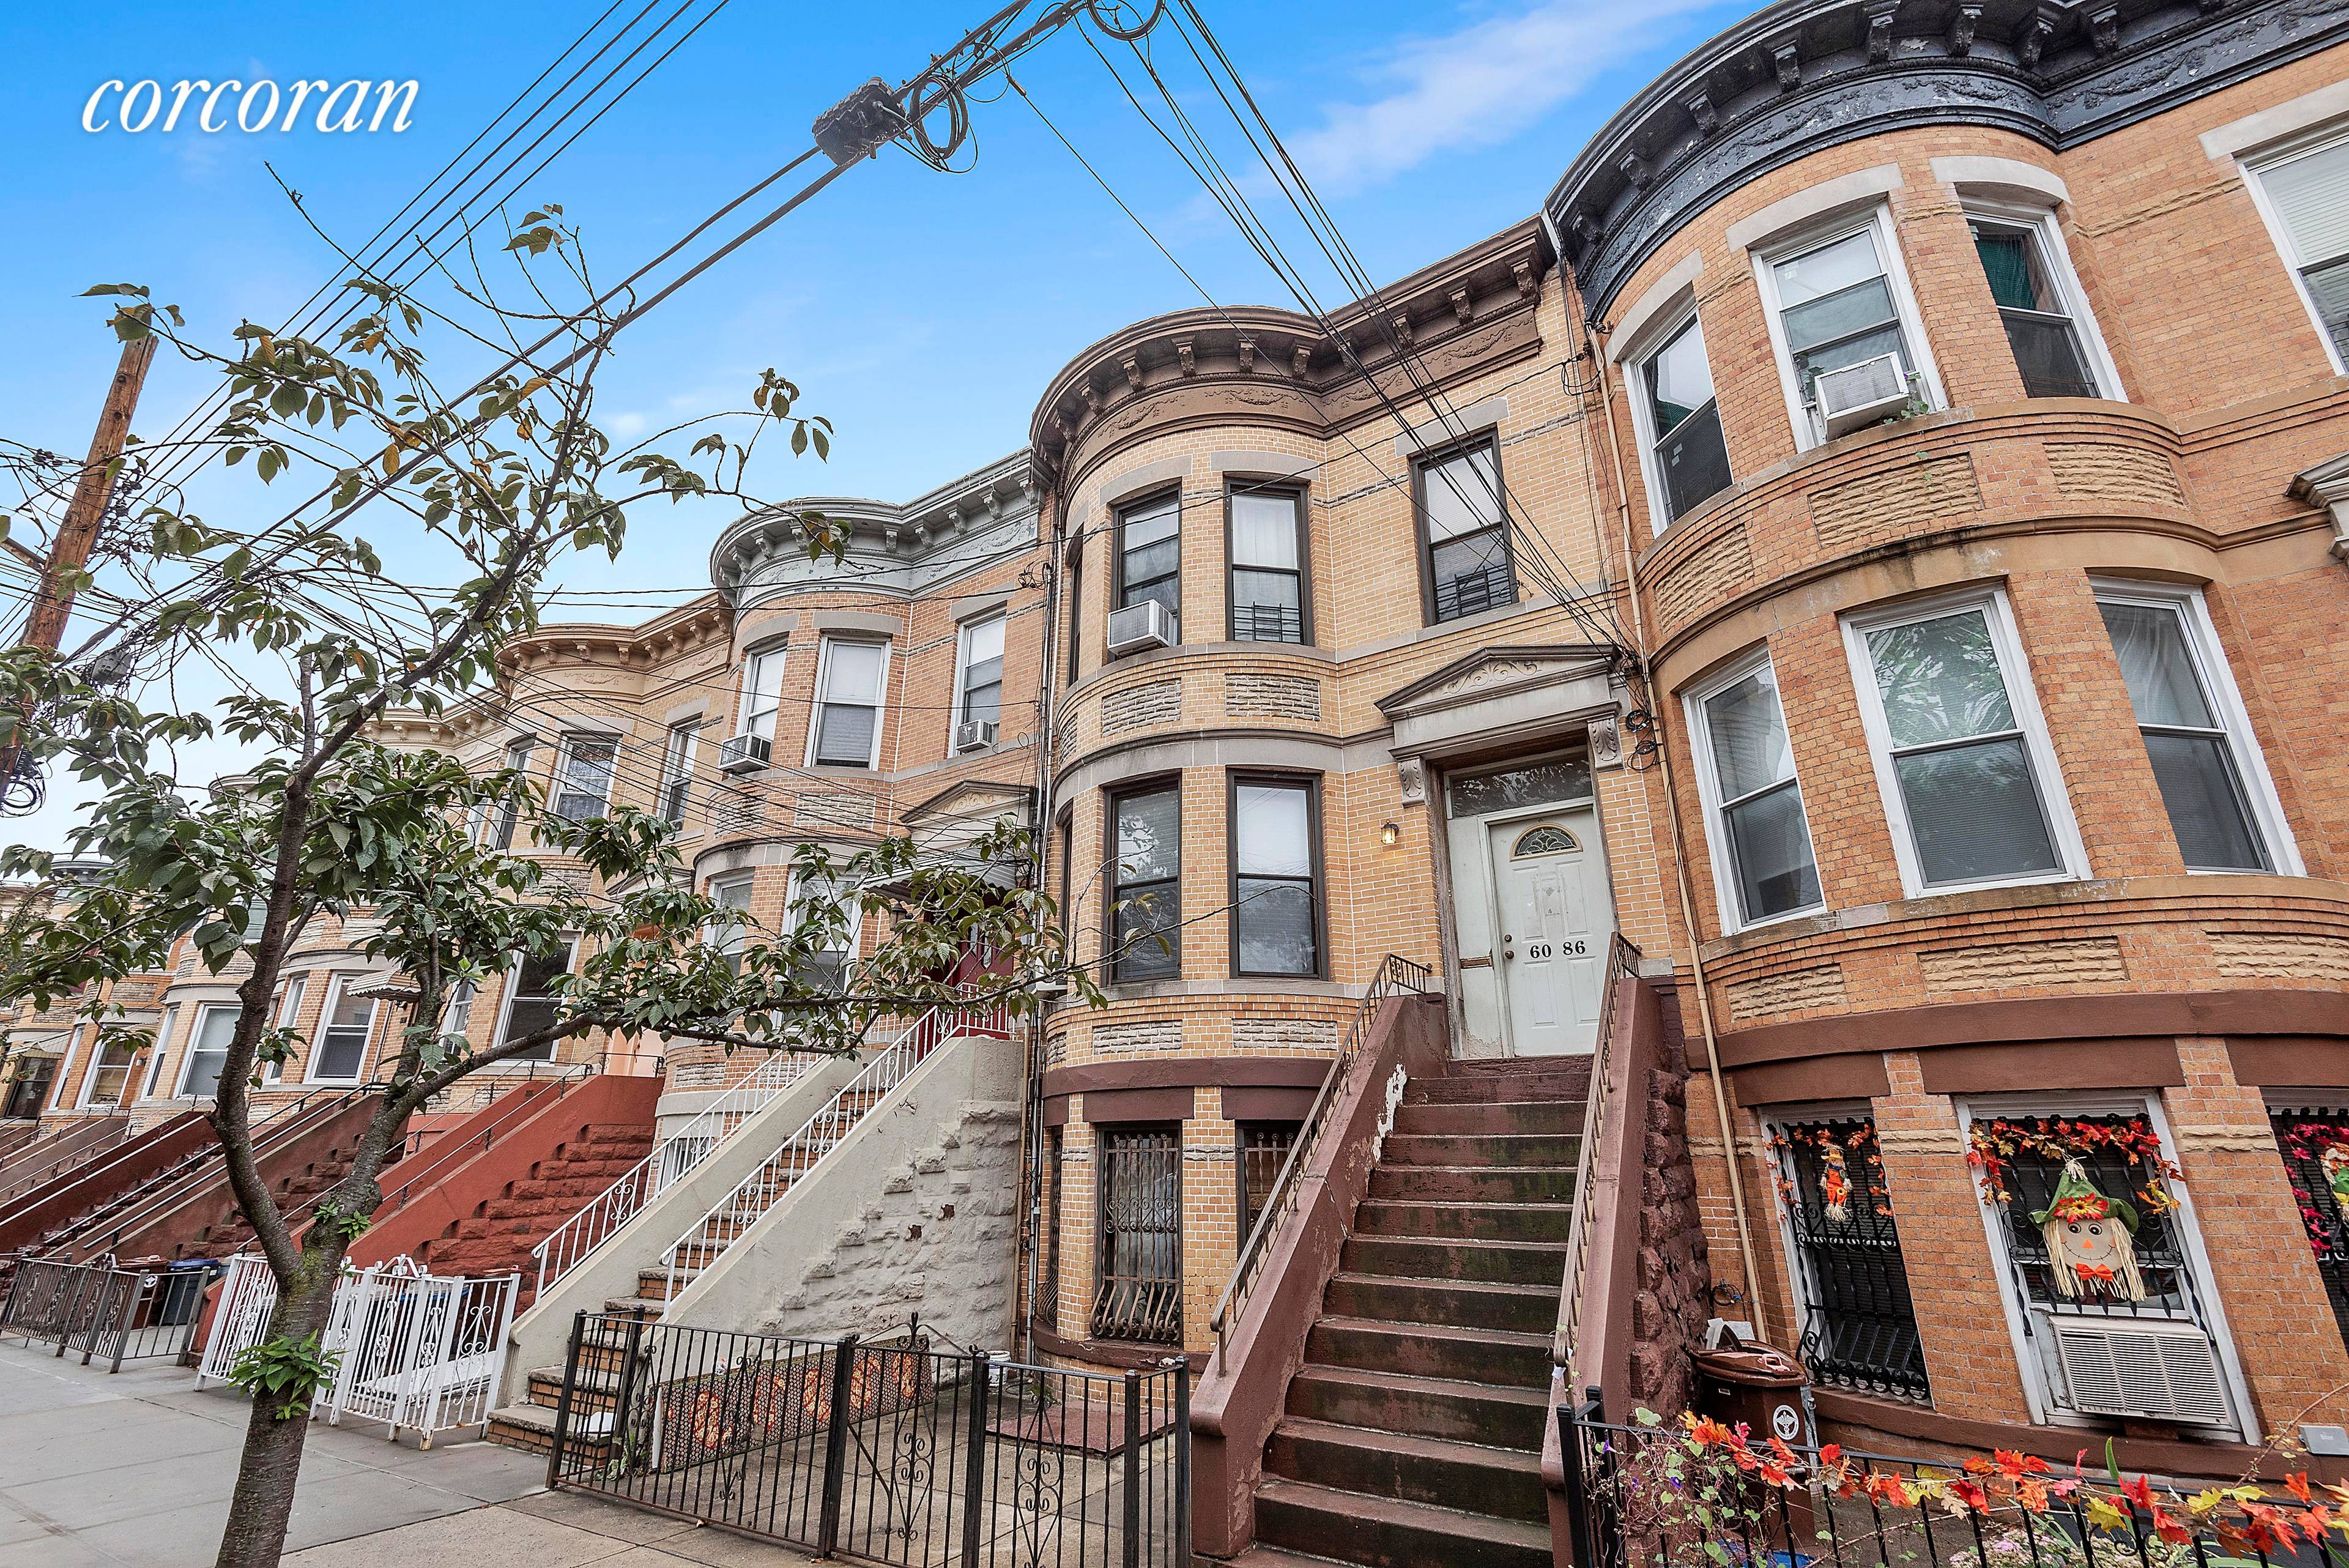 Come check out this charming, 3 family brick townhouse in Ridgewood with large apartments and high ceilings.